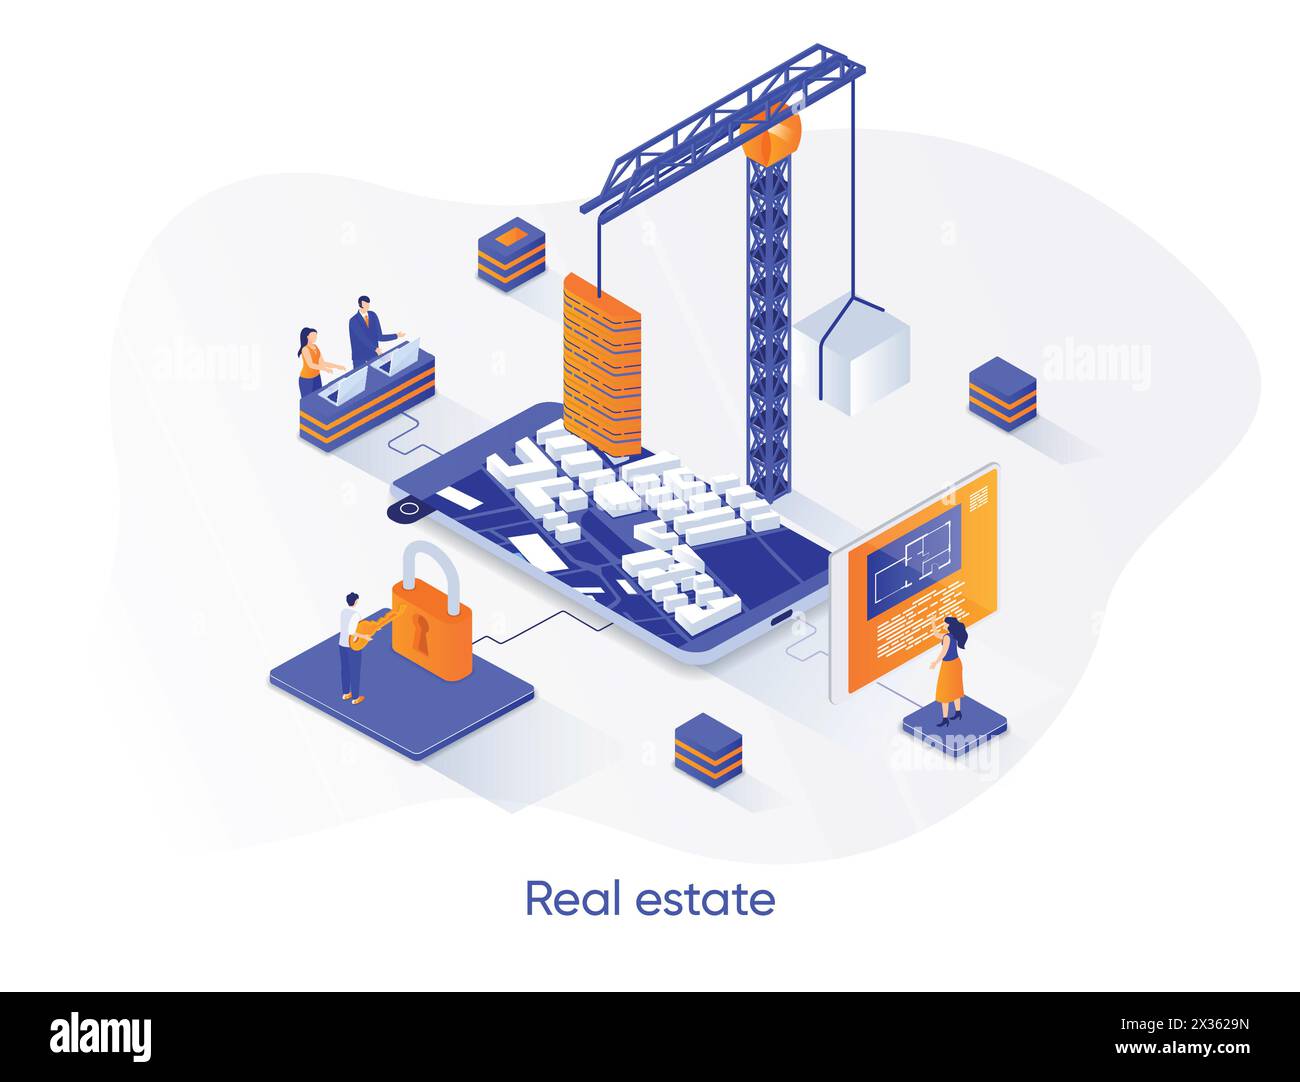 Real estate isometric web banner. Residential and commercial real estate property isometry concept. Engineering and construction company 3d scene desi Stock Vector